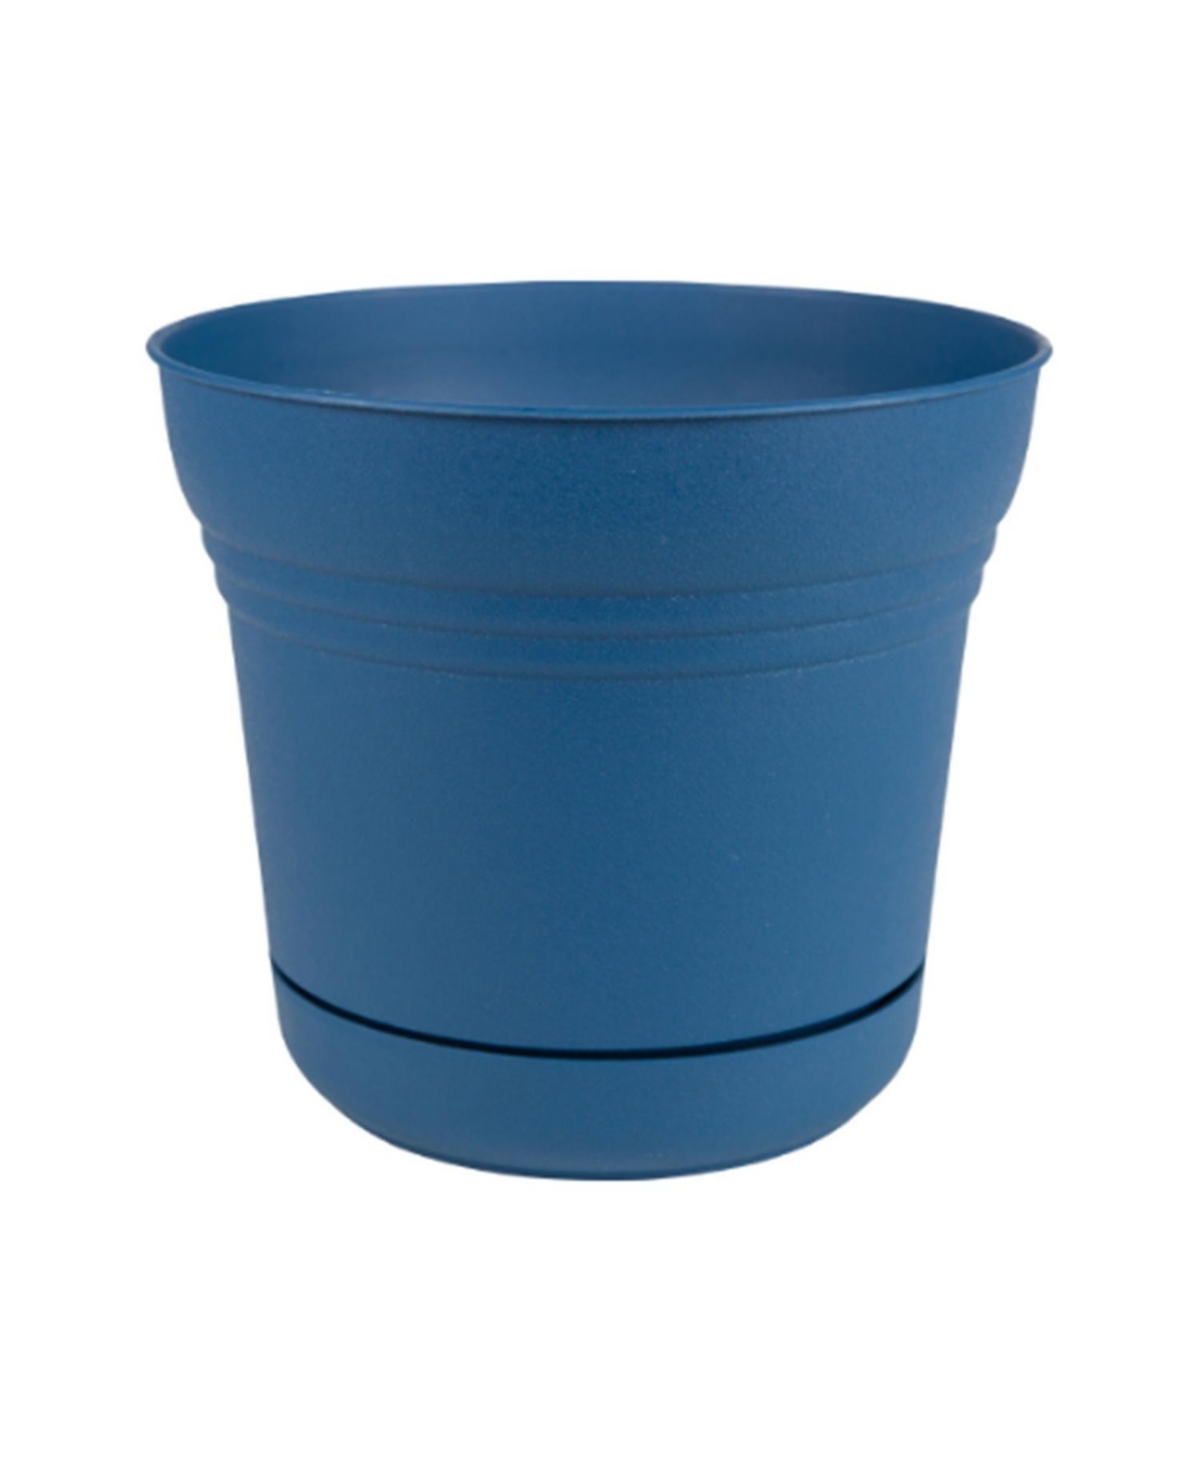 SP1433 Saturn Collection Planter with Saucer, Classic Blue - 14 inches - Blue